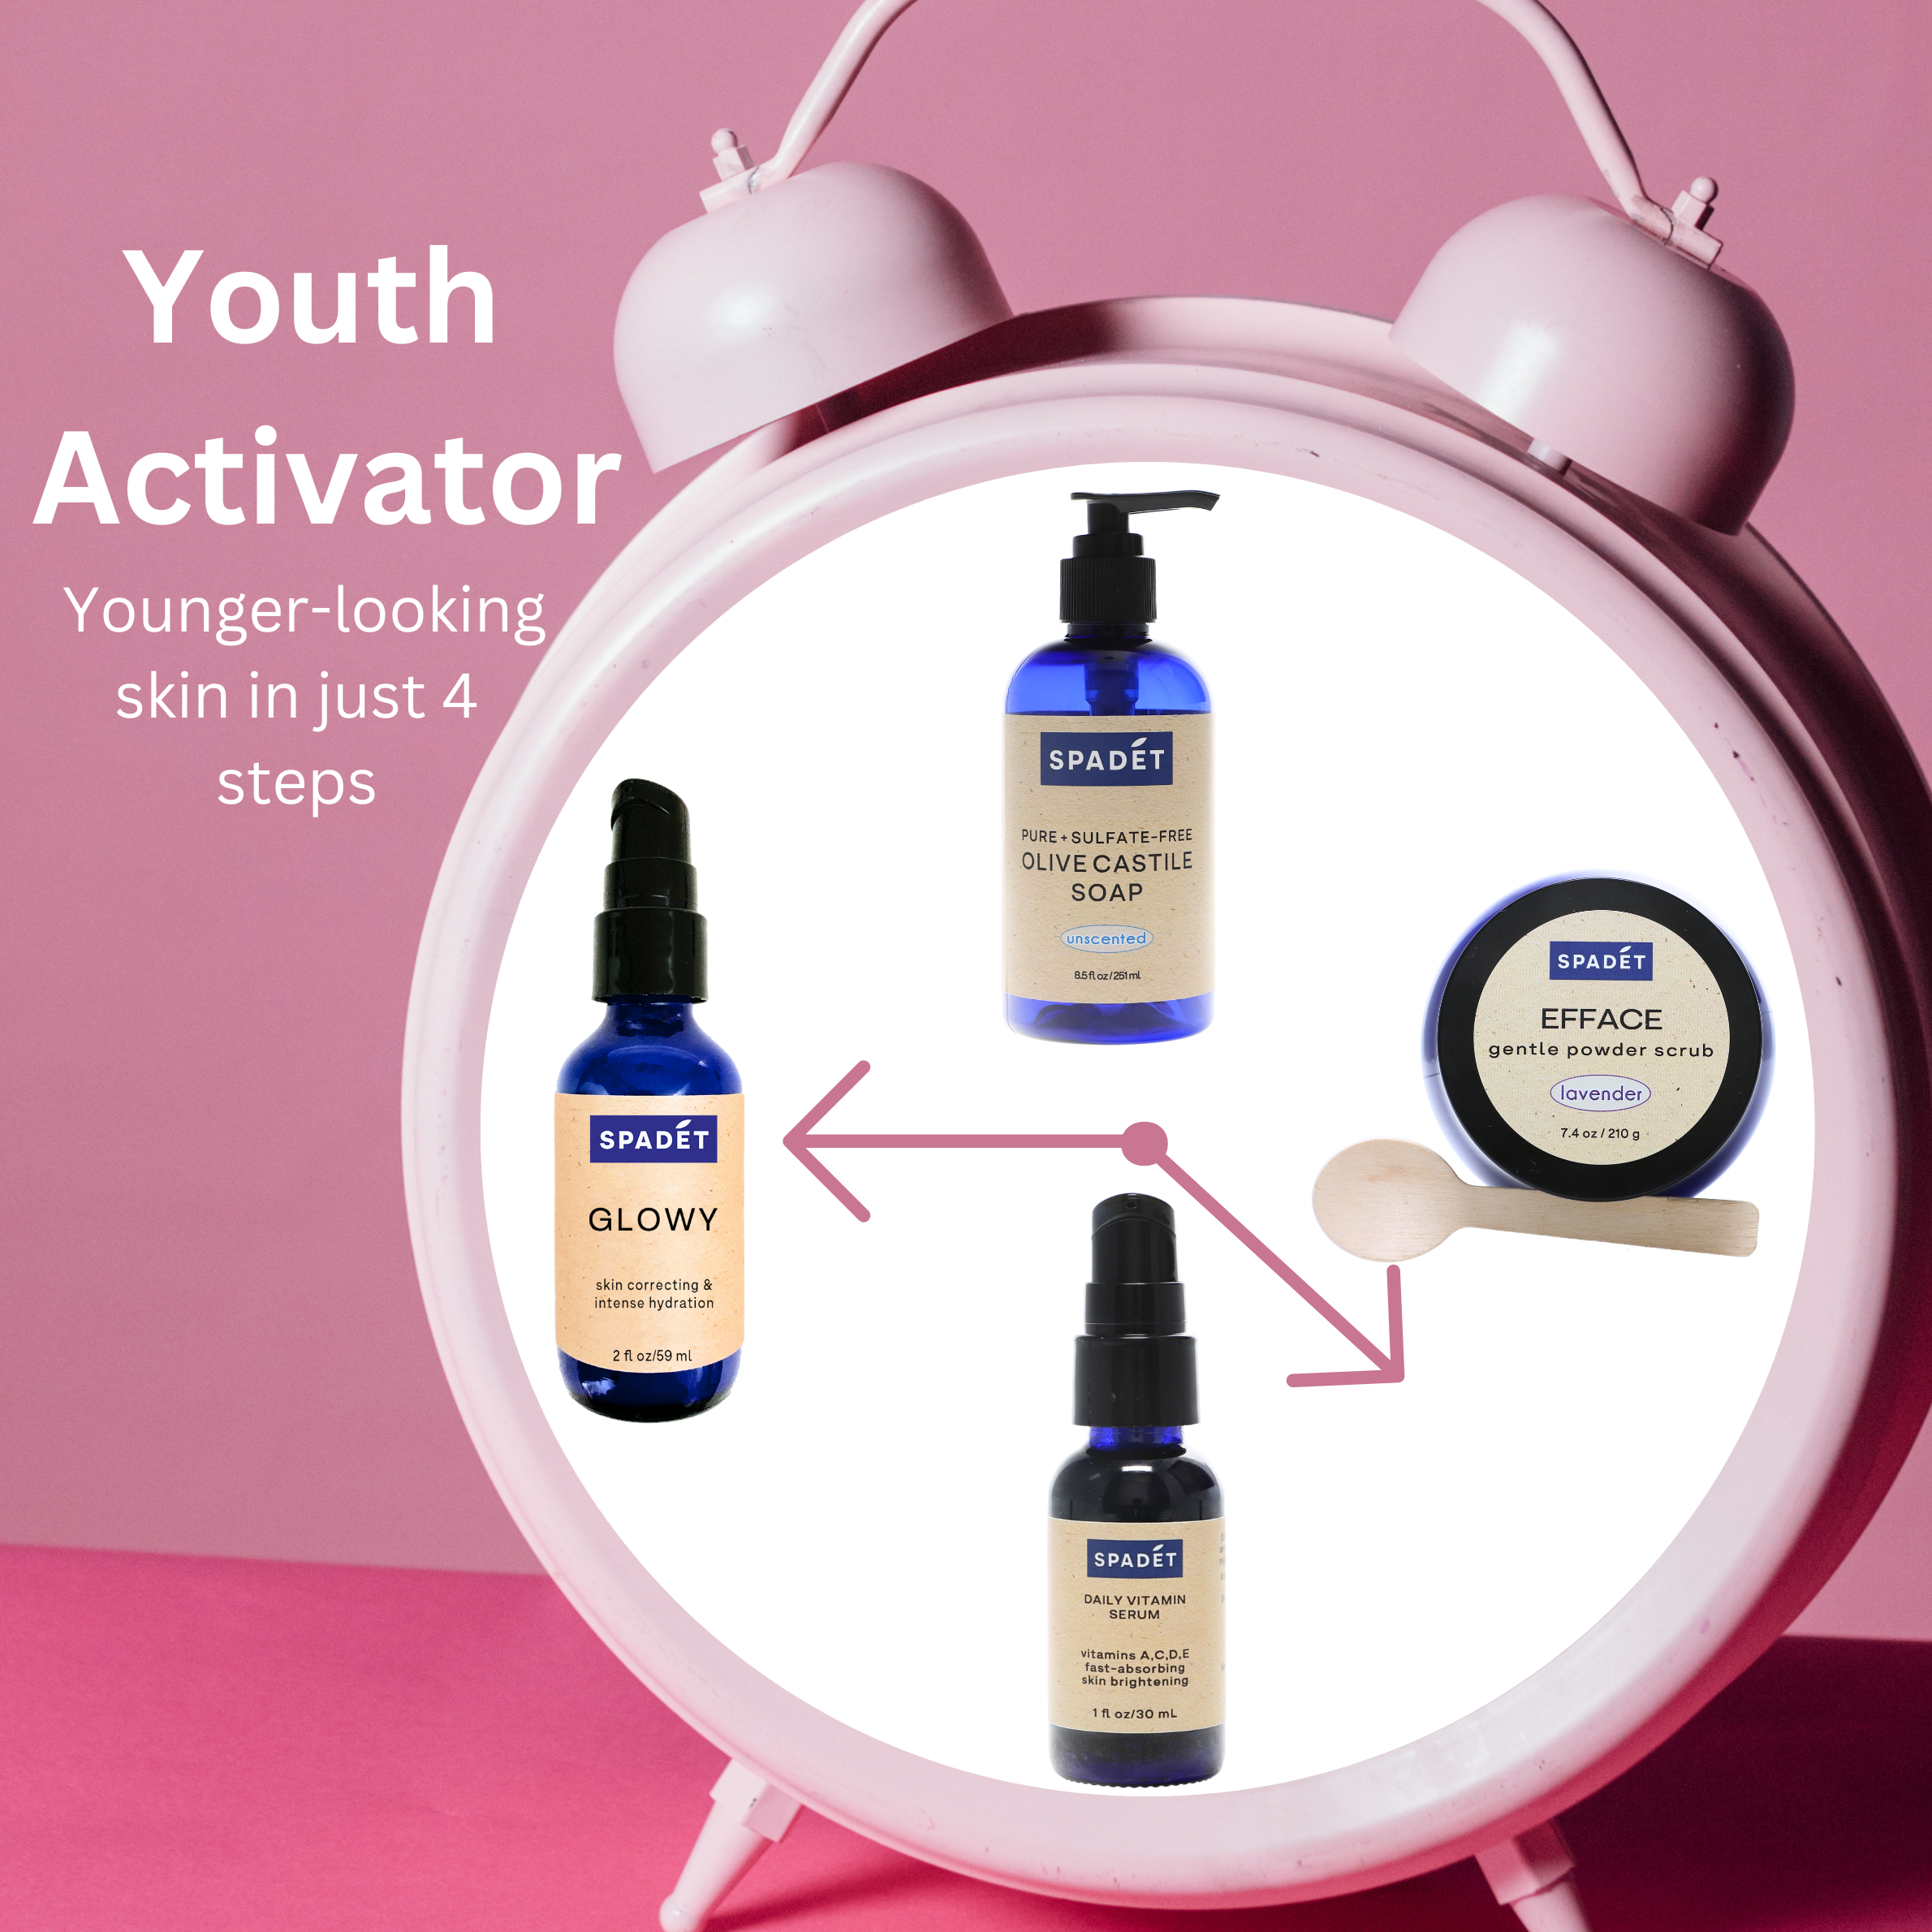 YOUTH ACTIVATOR